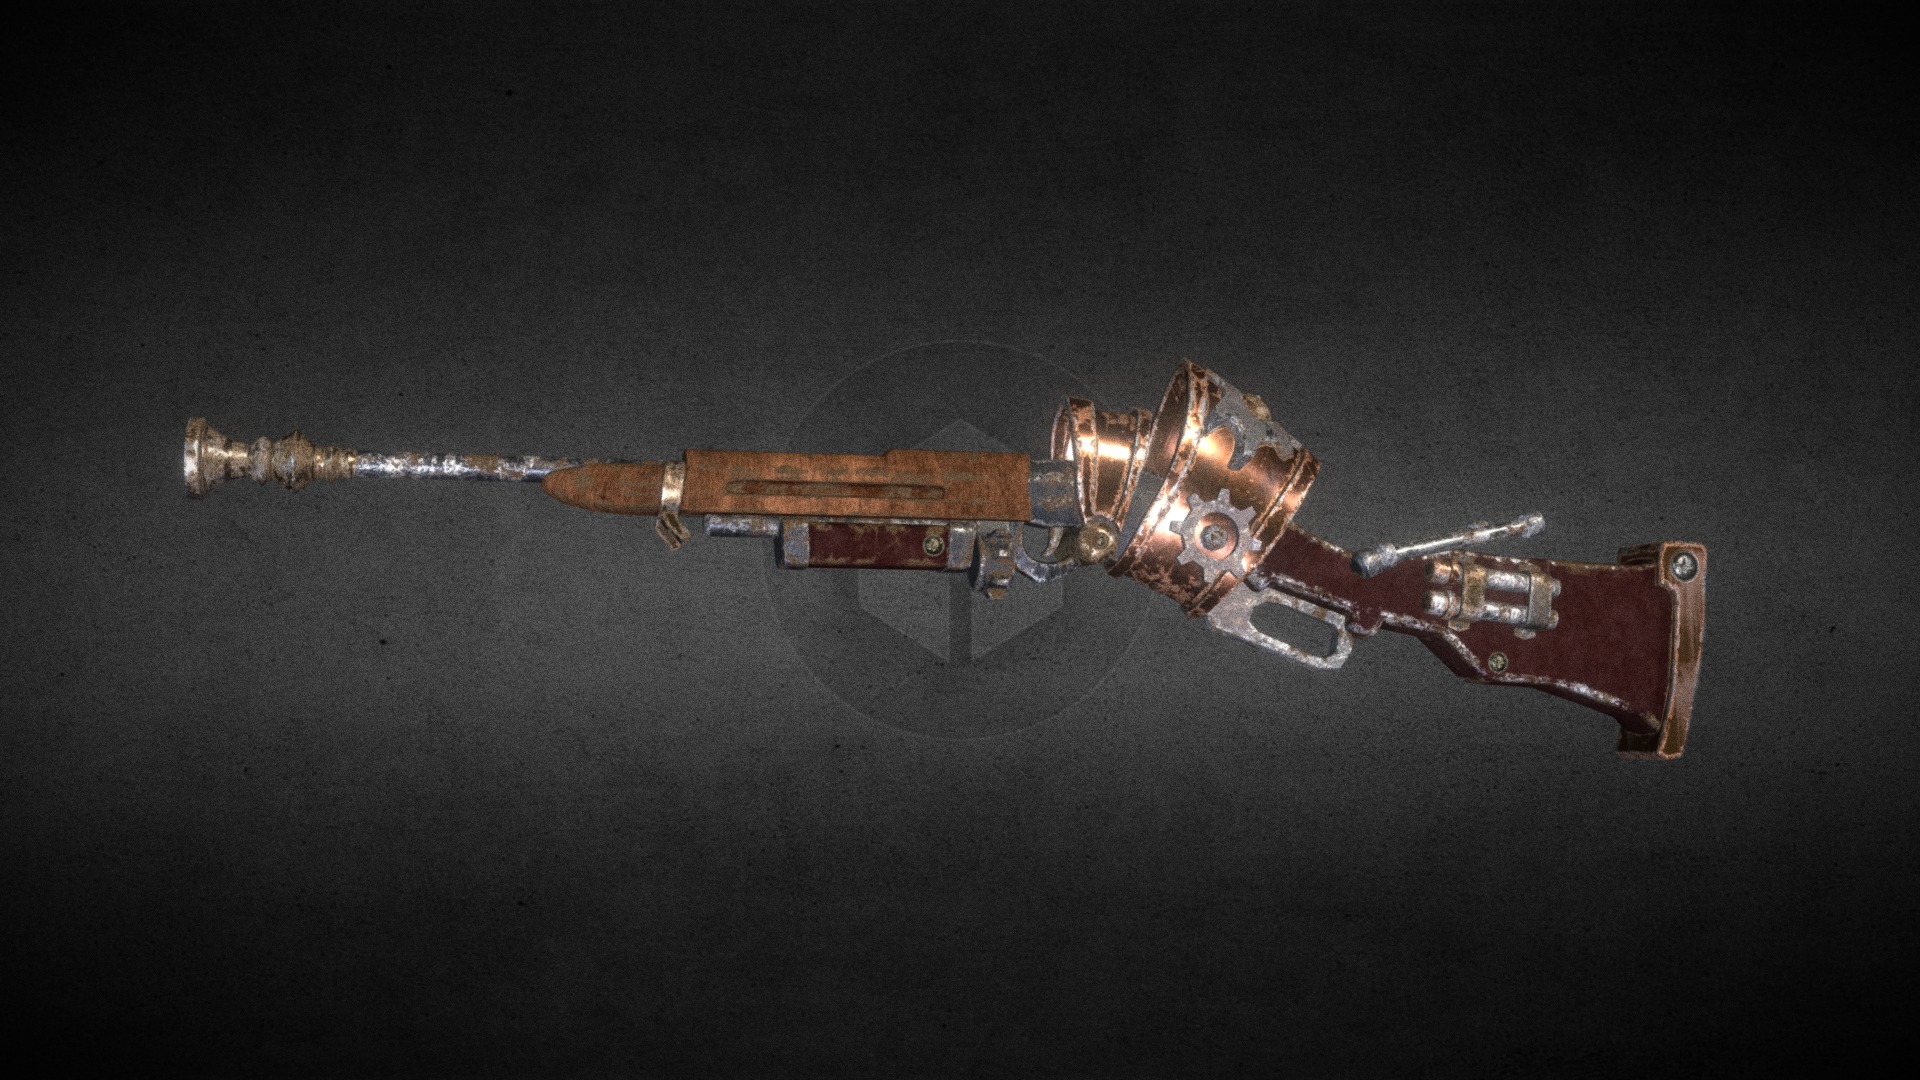 A Steampunk Winchester made for a game jam ready for a game engine it has 5117 verts 5022 polys and 9722 tris and the textures are PBR and the sizes are 2048 x 2048 and includes Diffuse, Roughness, Normal, AO and Metallic if you need game assets or STL files I am available for commission works 3d model